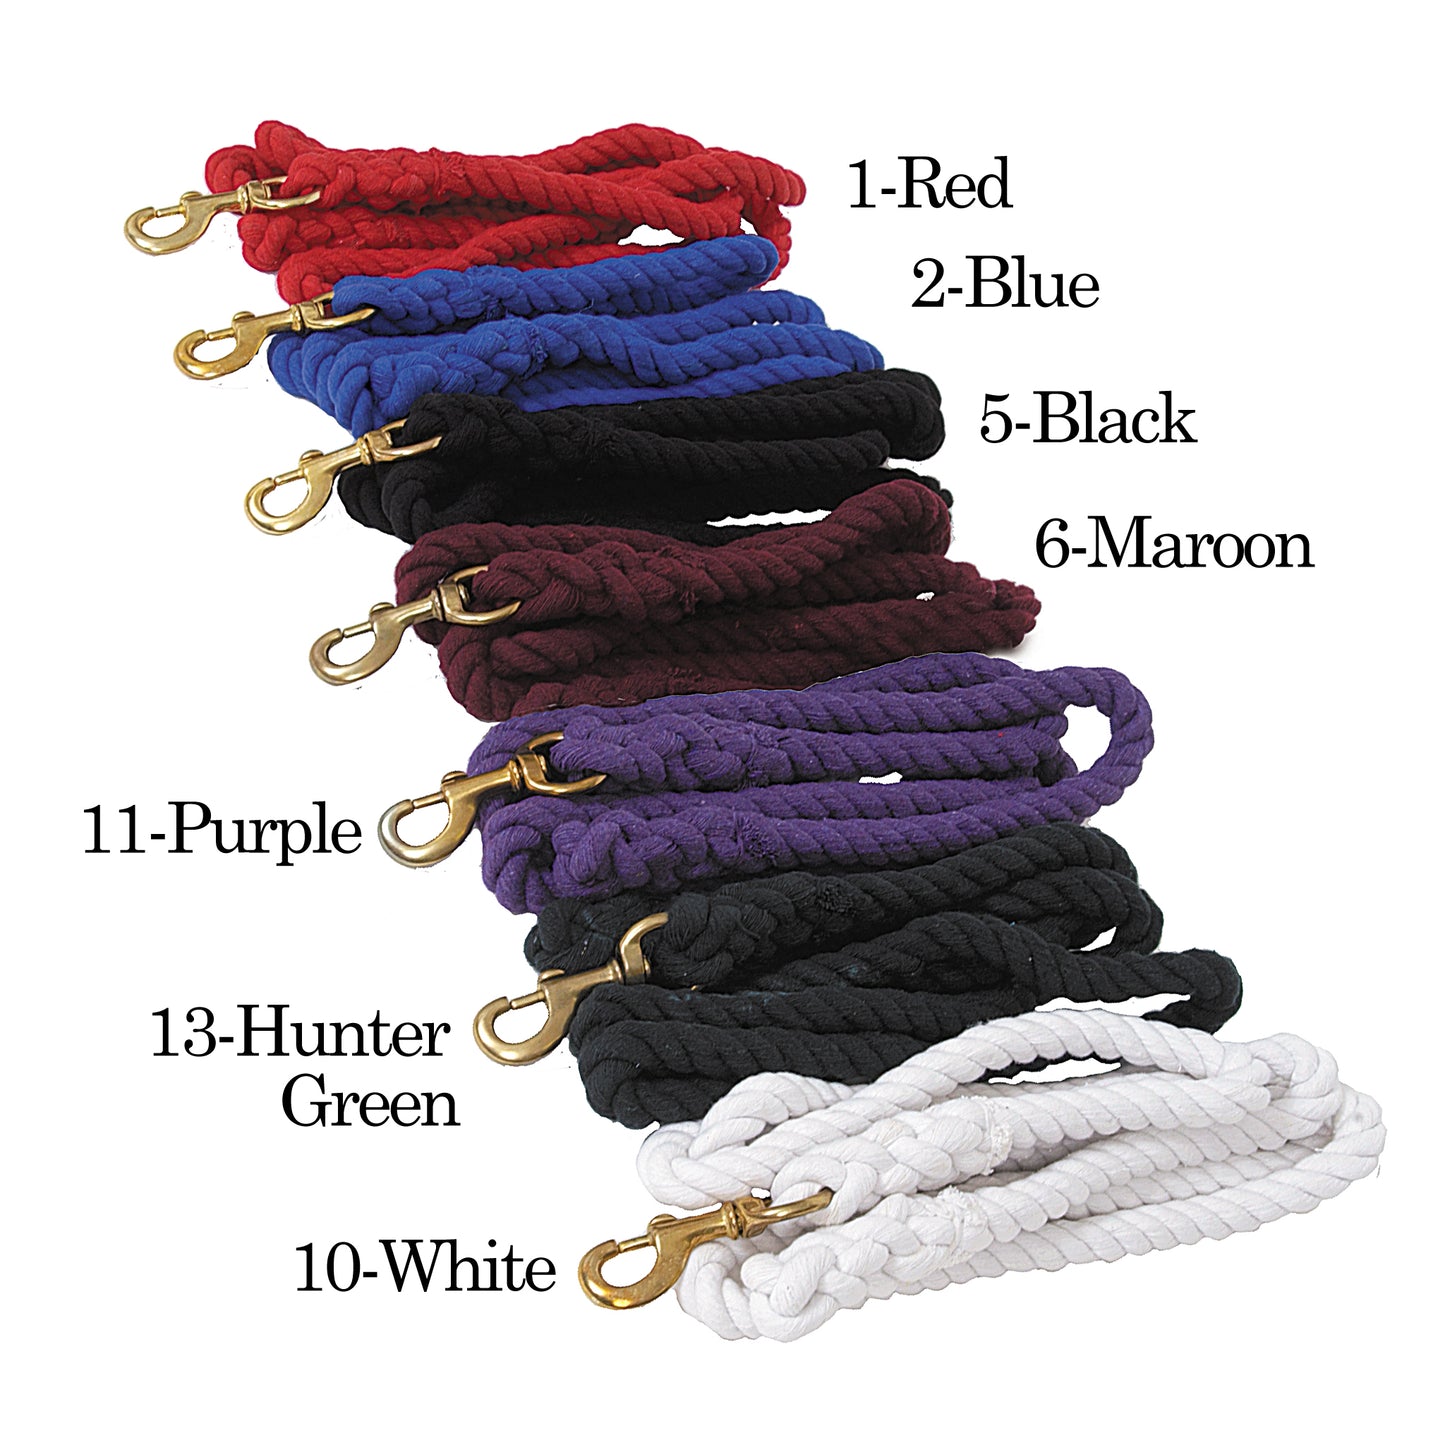 3/4" Thick Colored Cotton Leads with Bull Snap